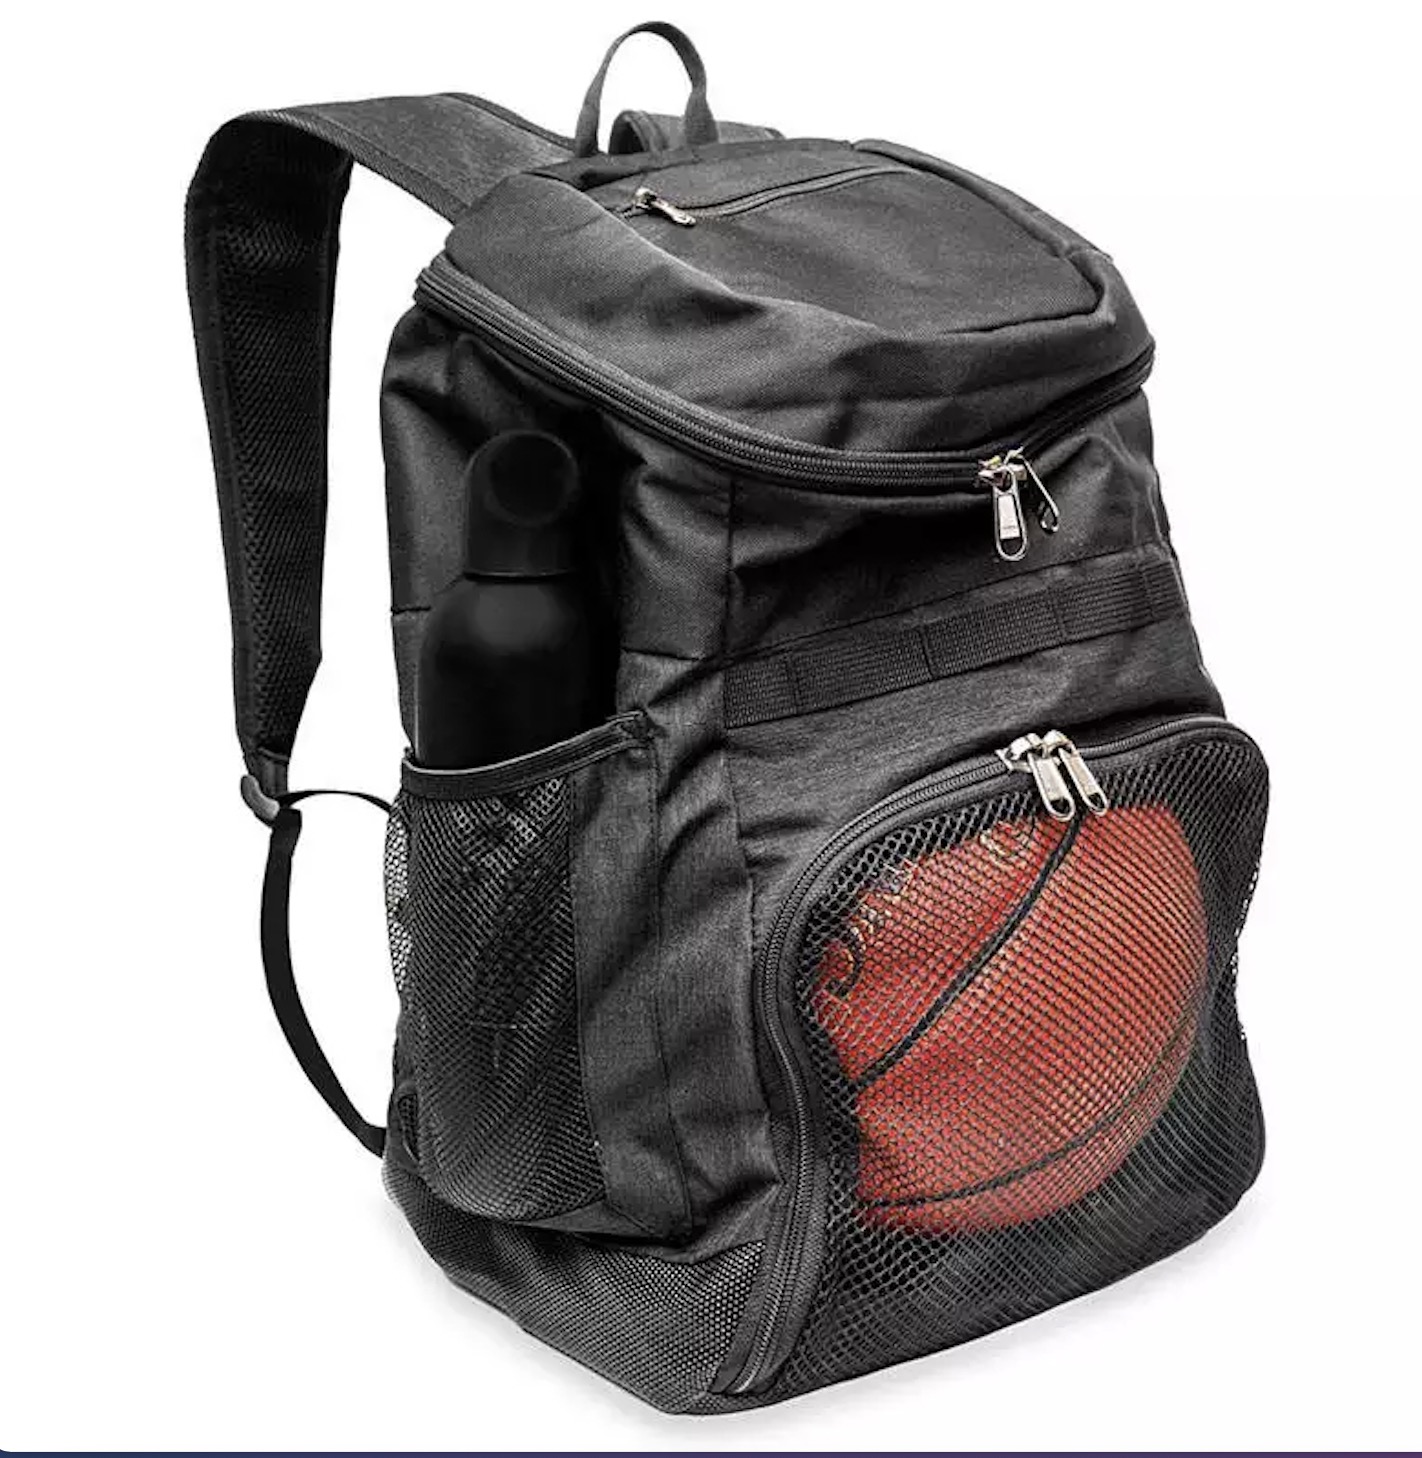 Basketball Backpack With Ball Compartment Sports Bag For Soccer Ball Gym,Outdoor,Travel